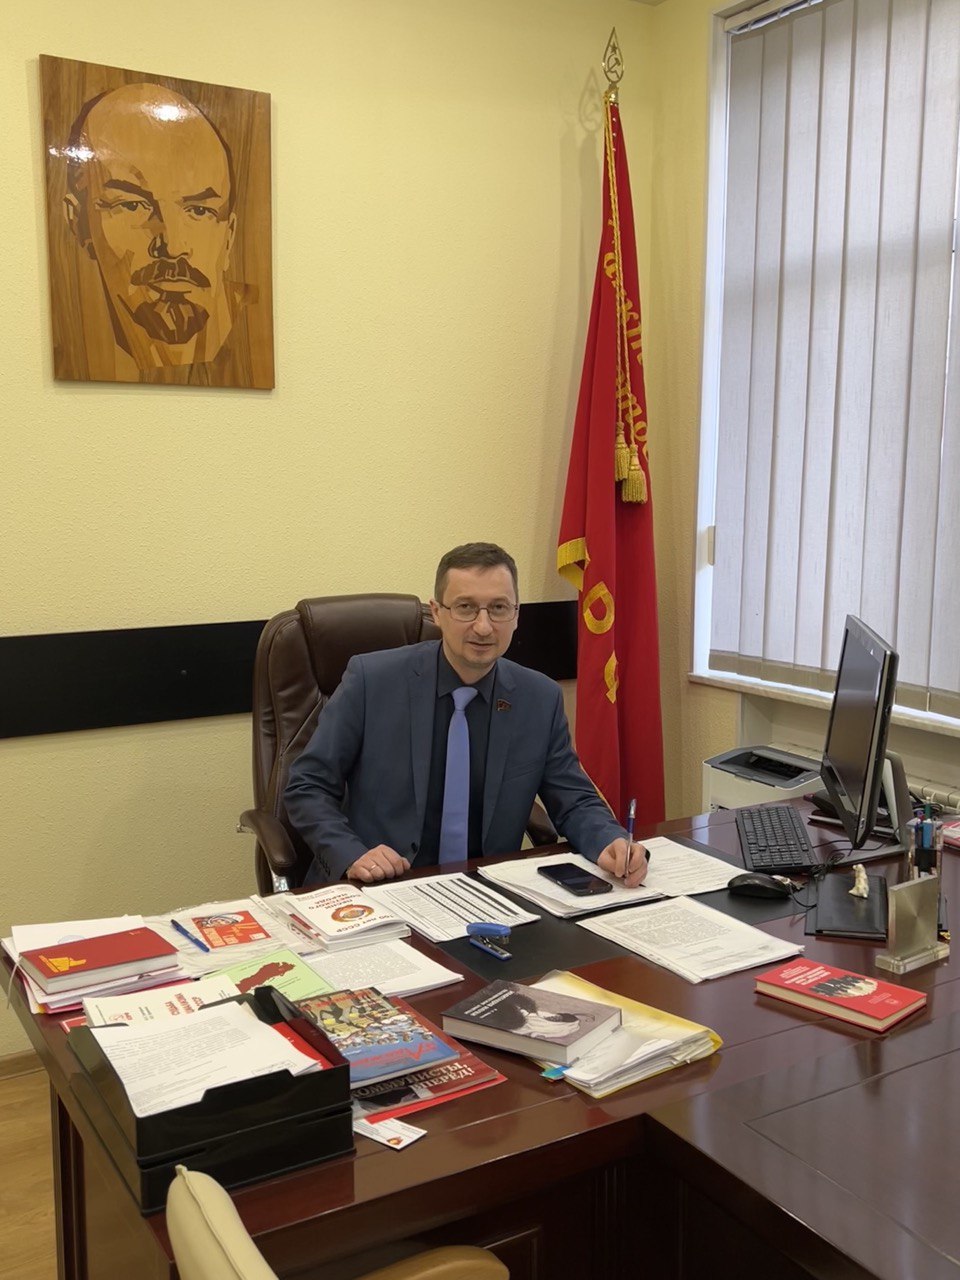 At the KPRF office in Saint Petersburg sits Roman Kononenko, a member of the Presidium of the Central Committee of Communist Party of the Russian Federation (KPRF) and First Secretary of the Saint Petersburg City Committee of the KPRF / credit: Fergie Chambers